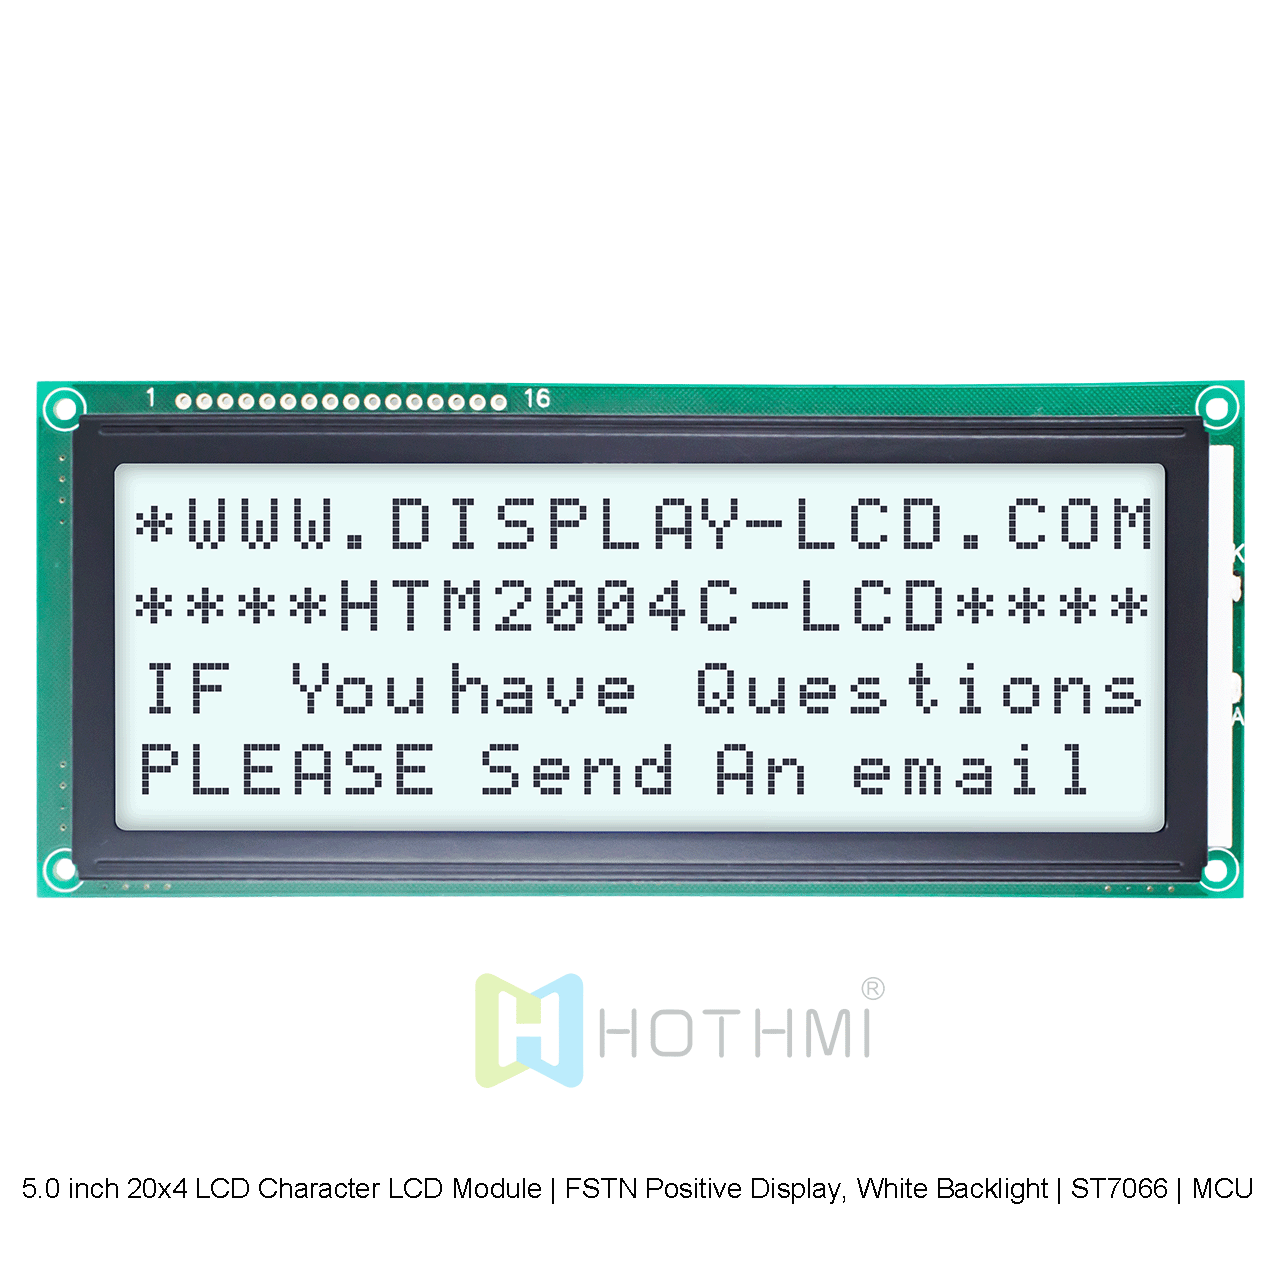 5.0 inch 20x4 LCD Character LCD Module | FSTN Positive Display, White Backlight | ST7066 | MCU Interface | Gray Characters on White Background Arduino